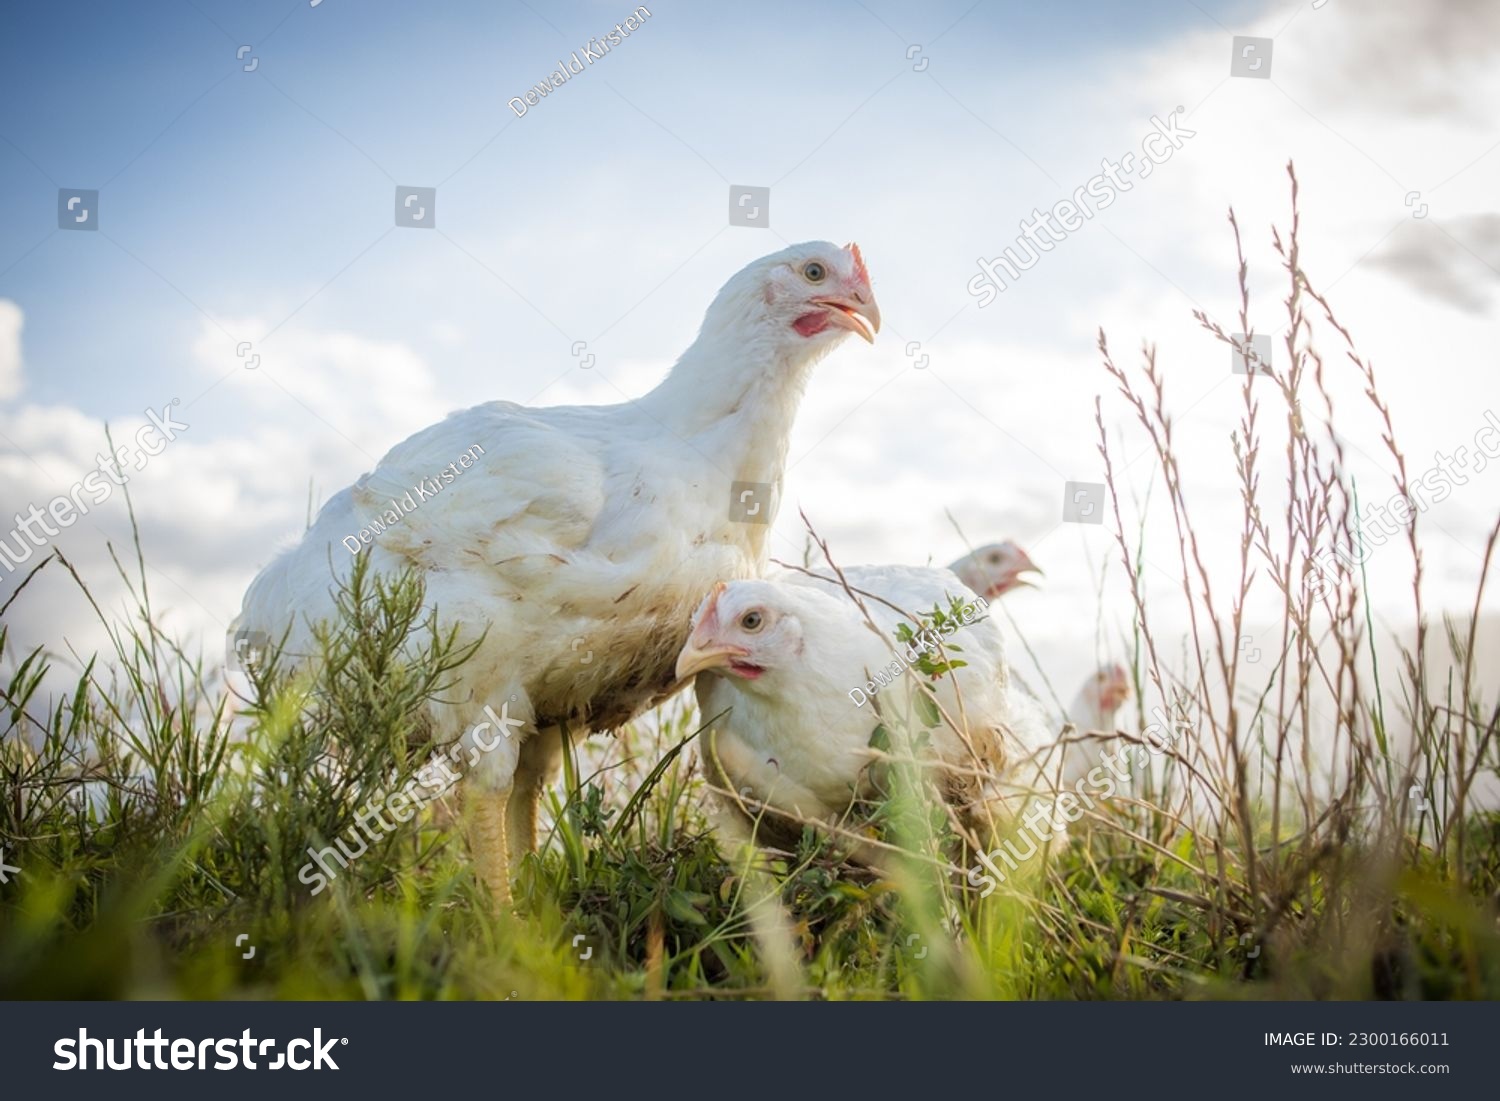 Close up image of a white Broiler Chicken living on a free range farm in a sustainable manner and cruelty free #2300166011